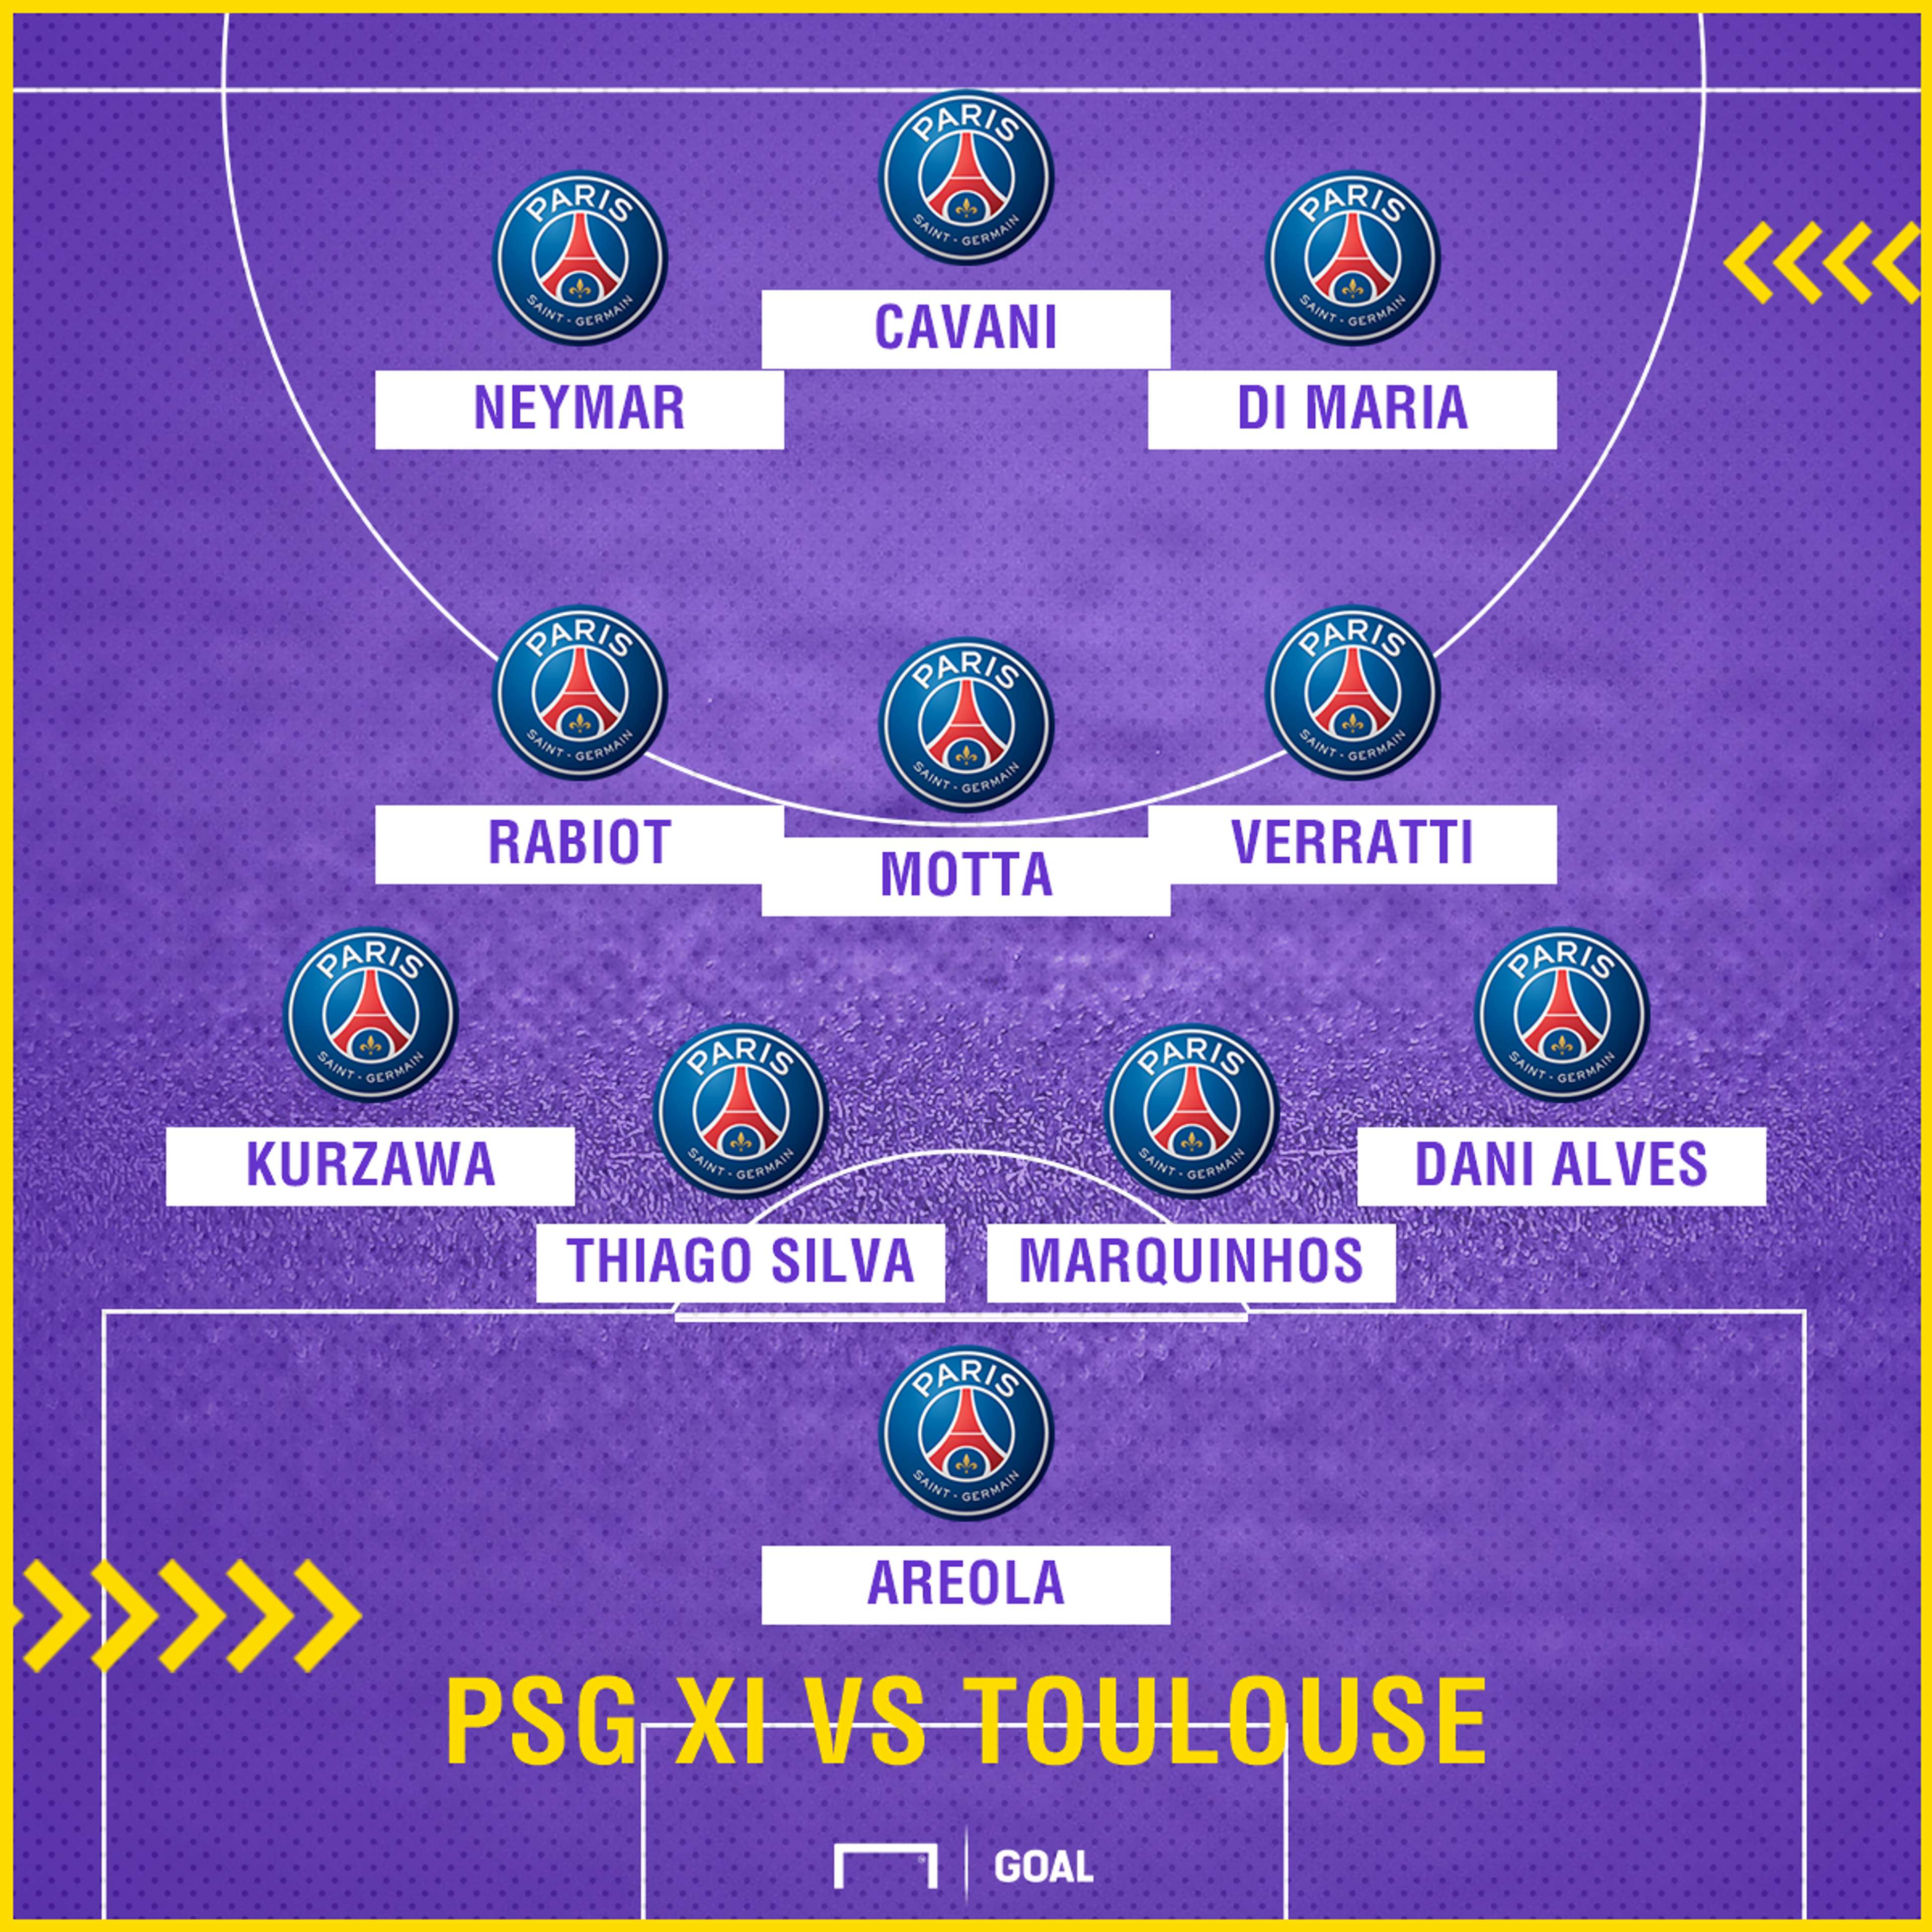 PSG with Neymar vs Toulouse